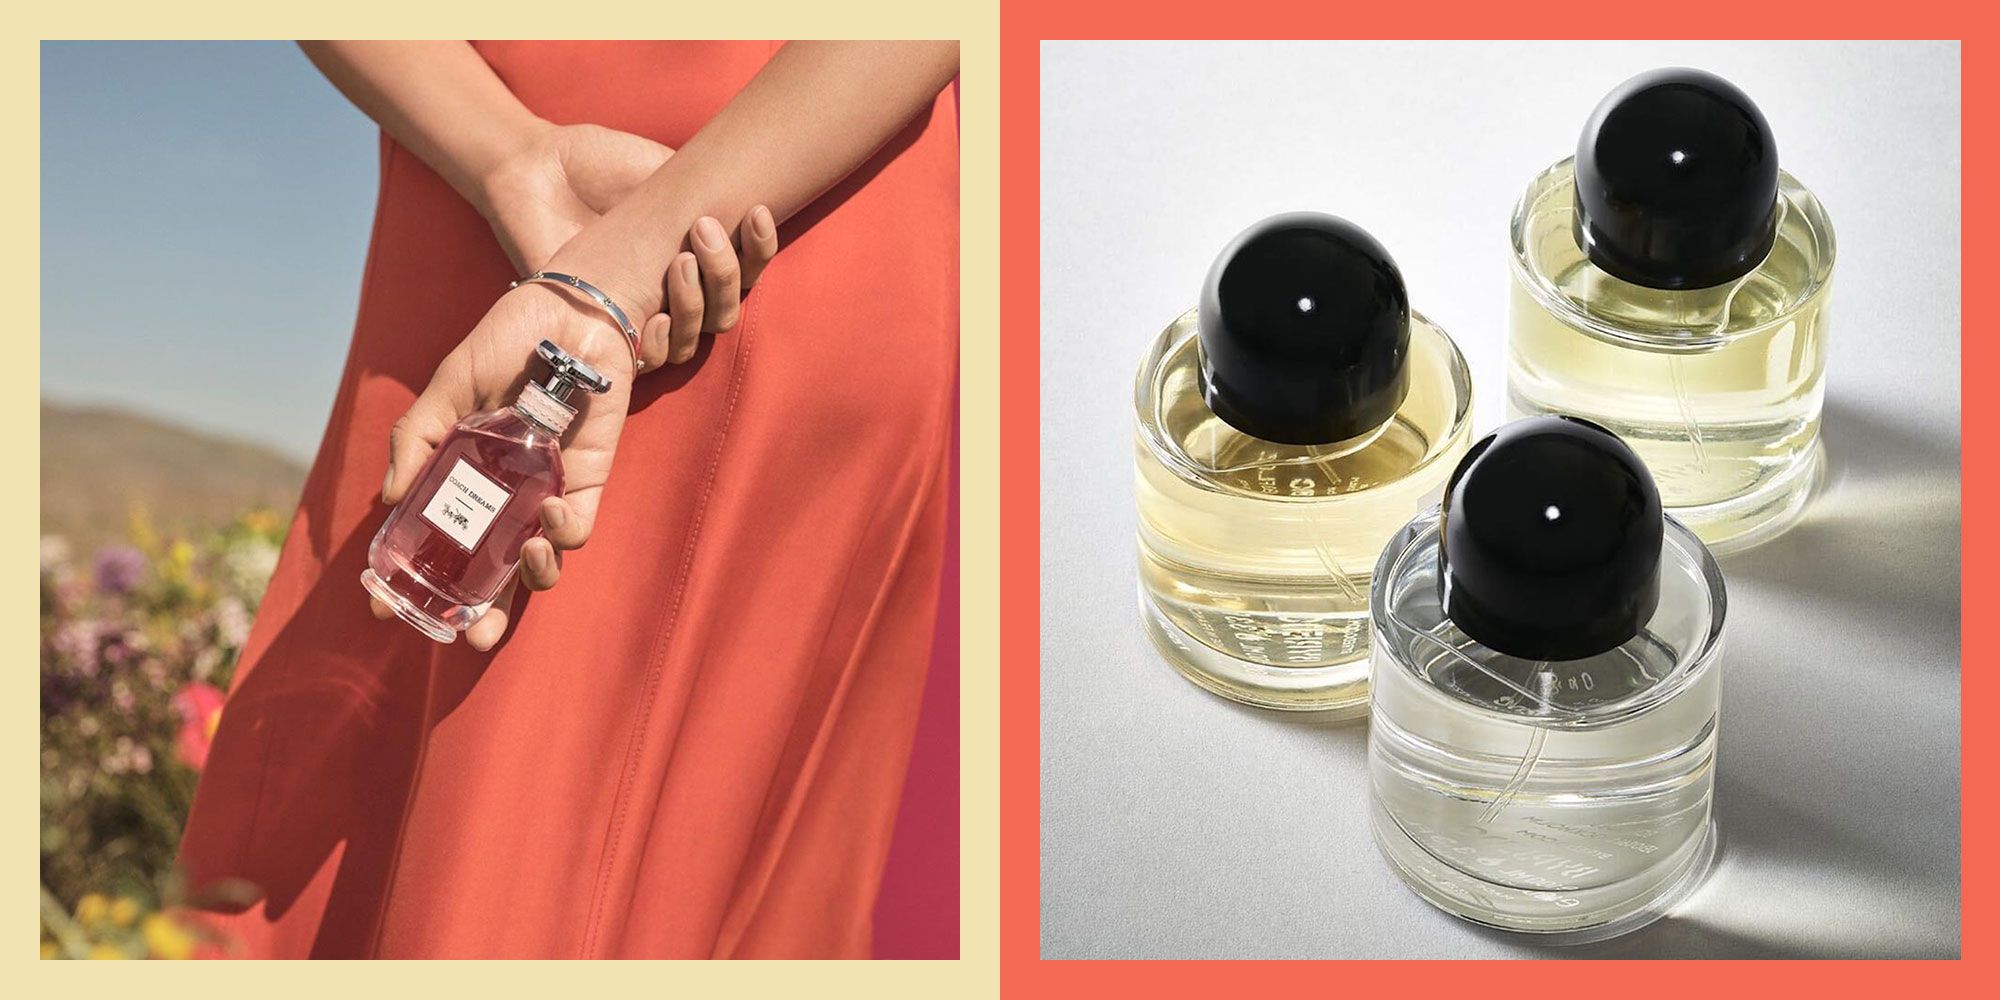 The Best Fragrances, According To Your Zodiac Sign (Libra – Pisces)